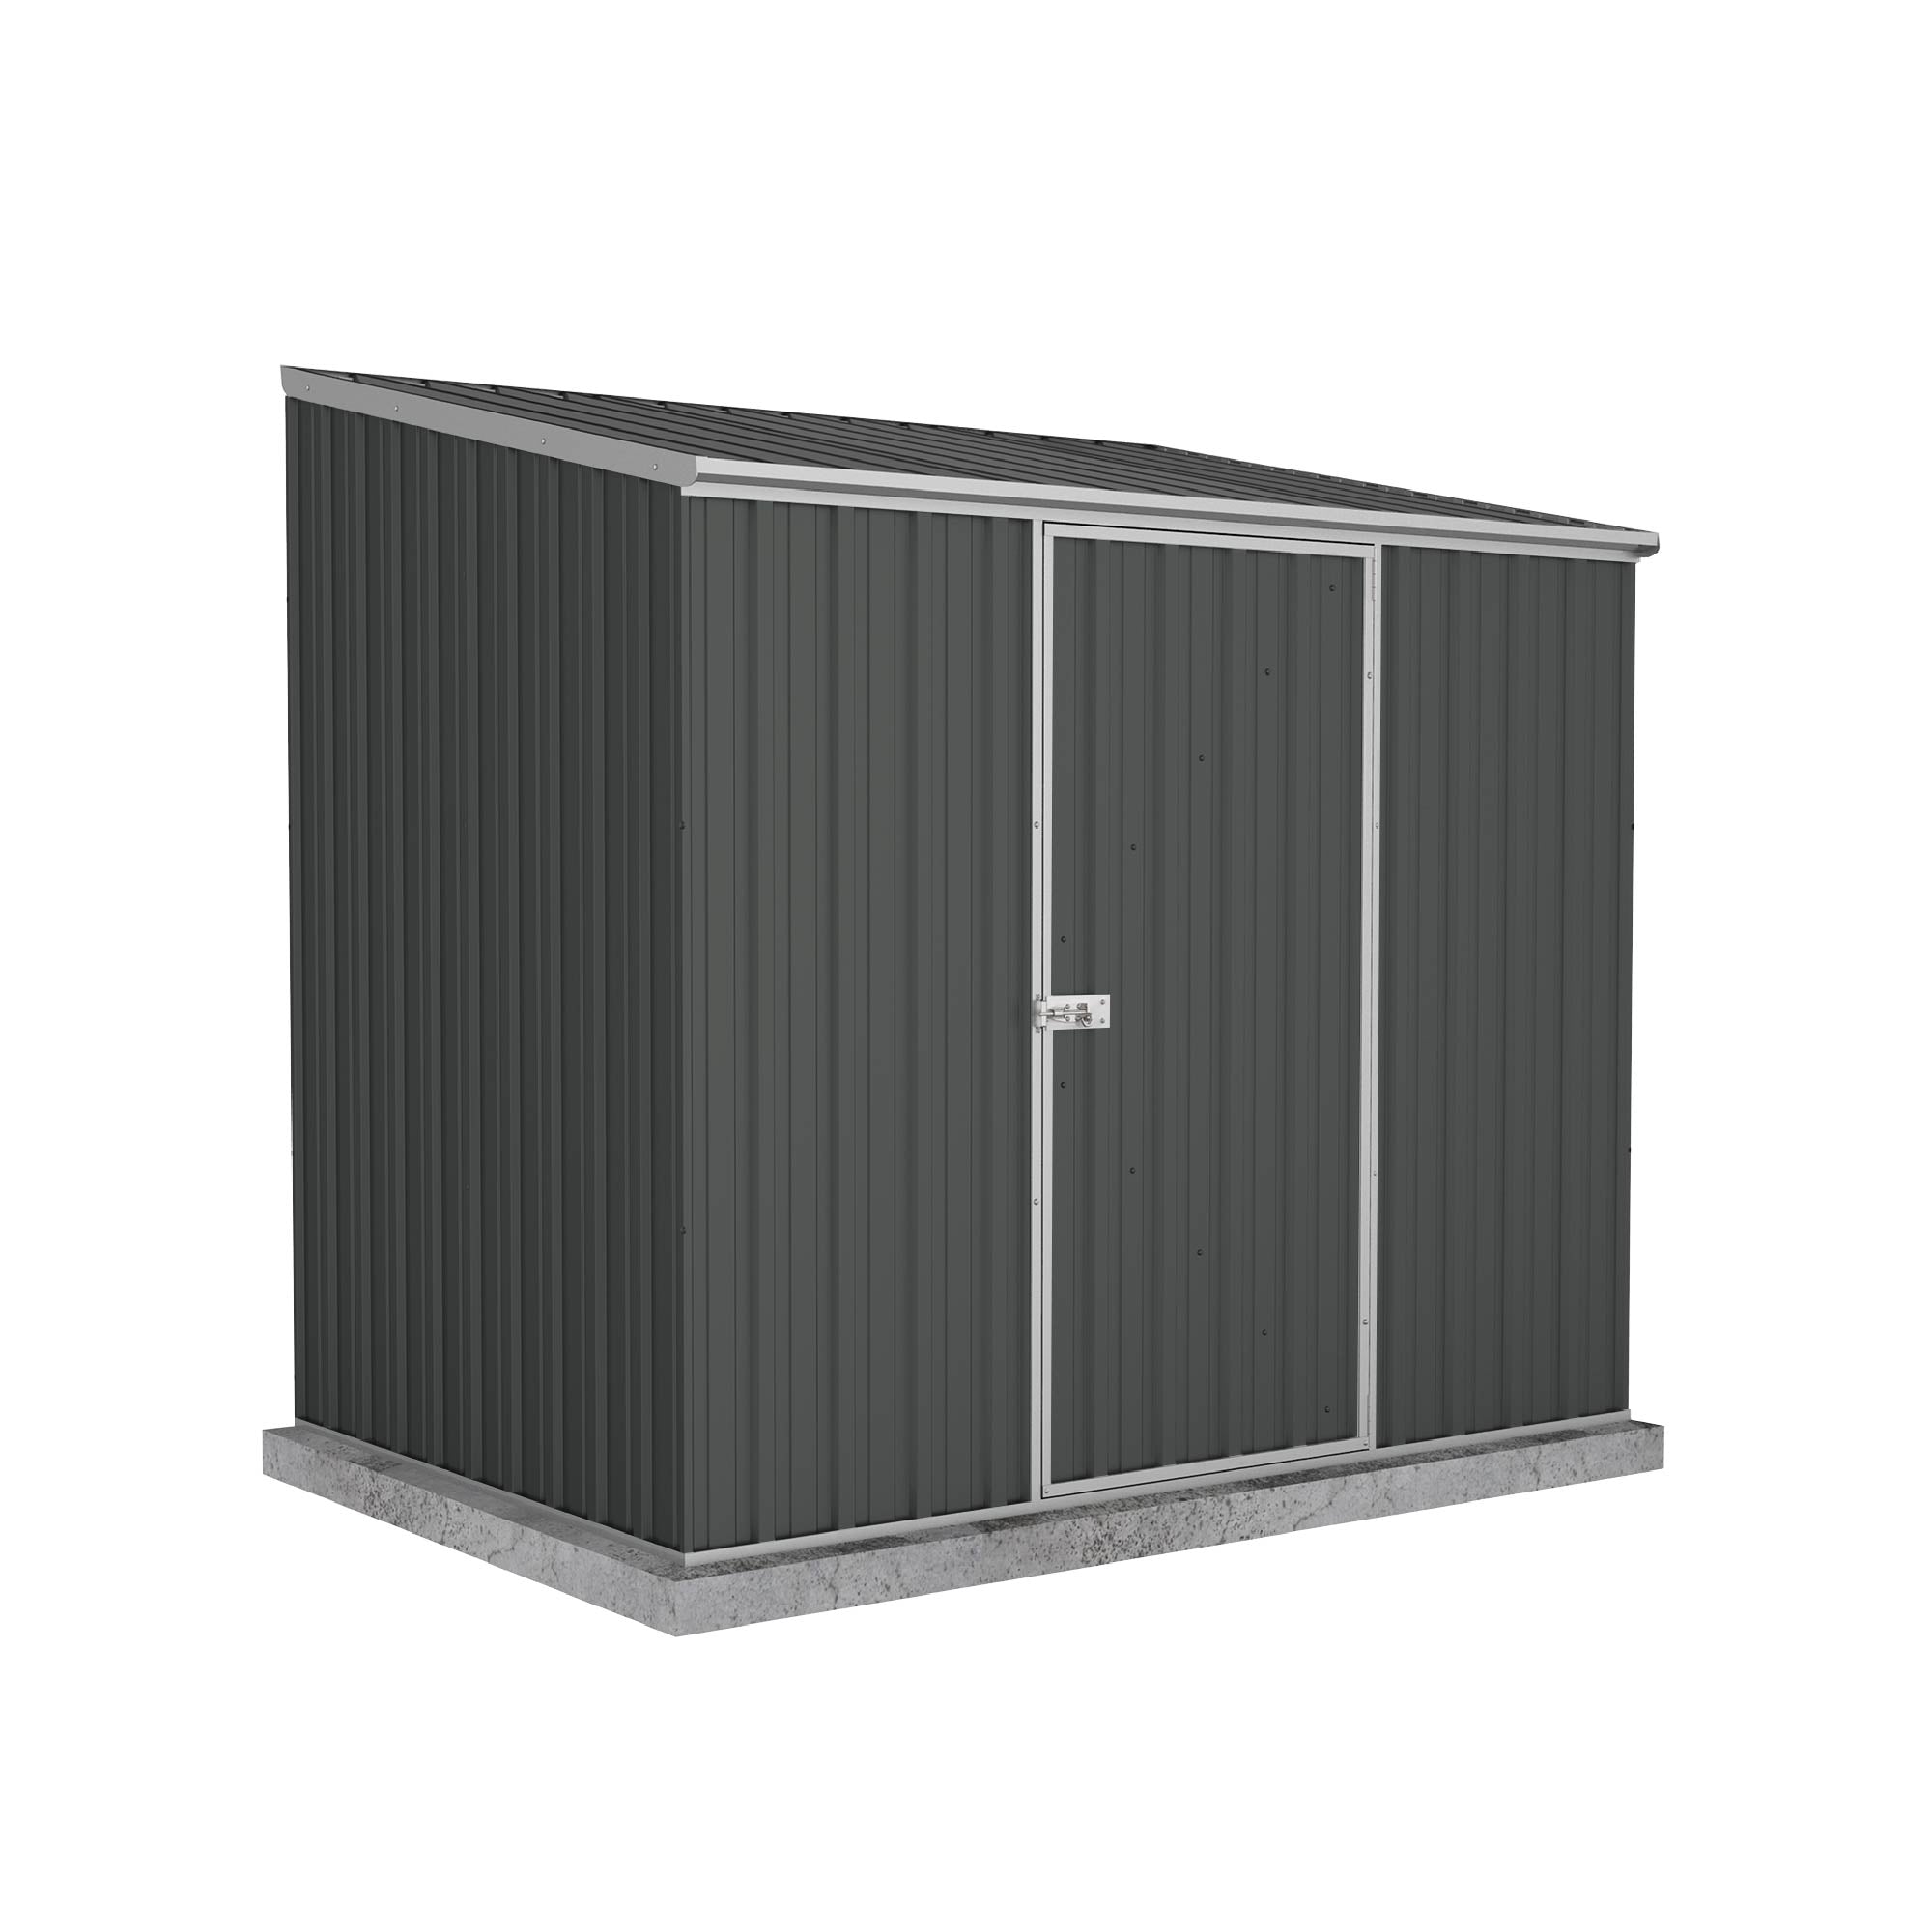 Absco 7' 5 x 5 Monument Grey Easy Build Pent Metal Shed